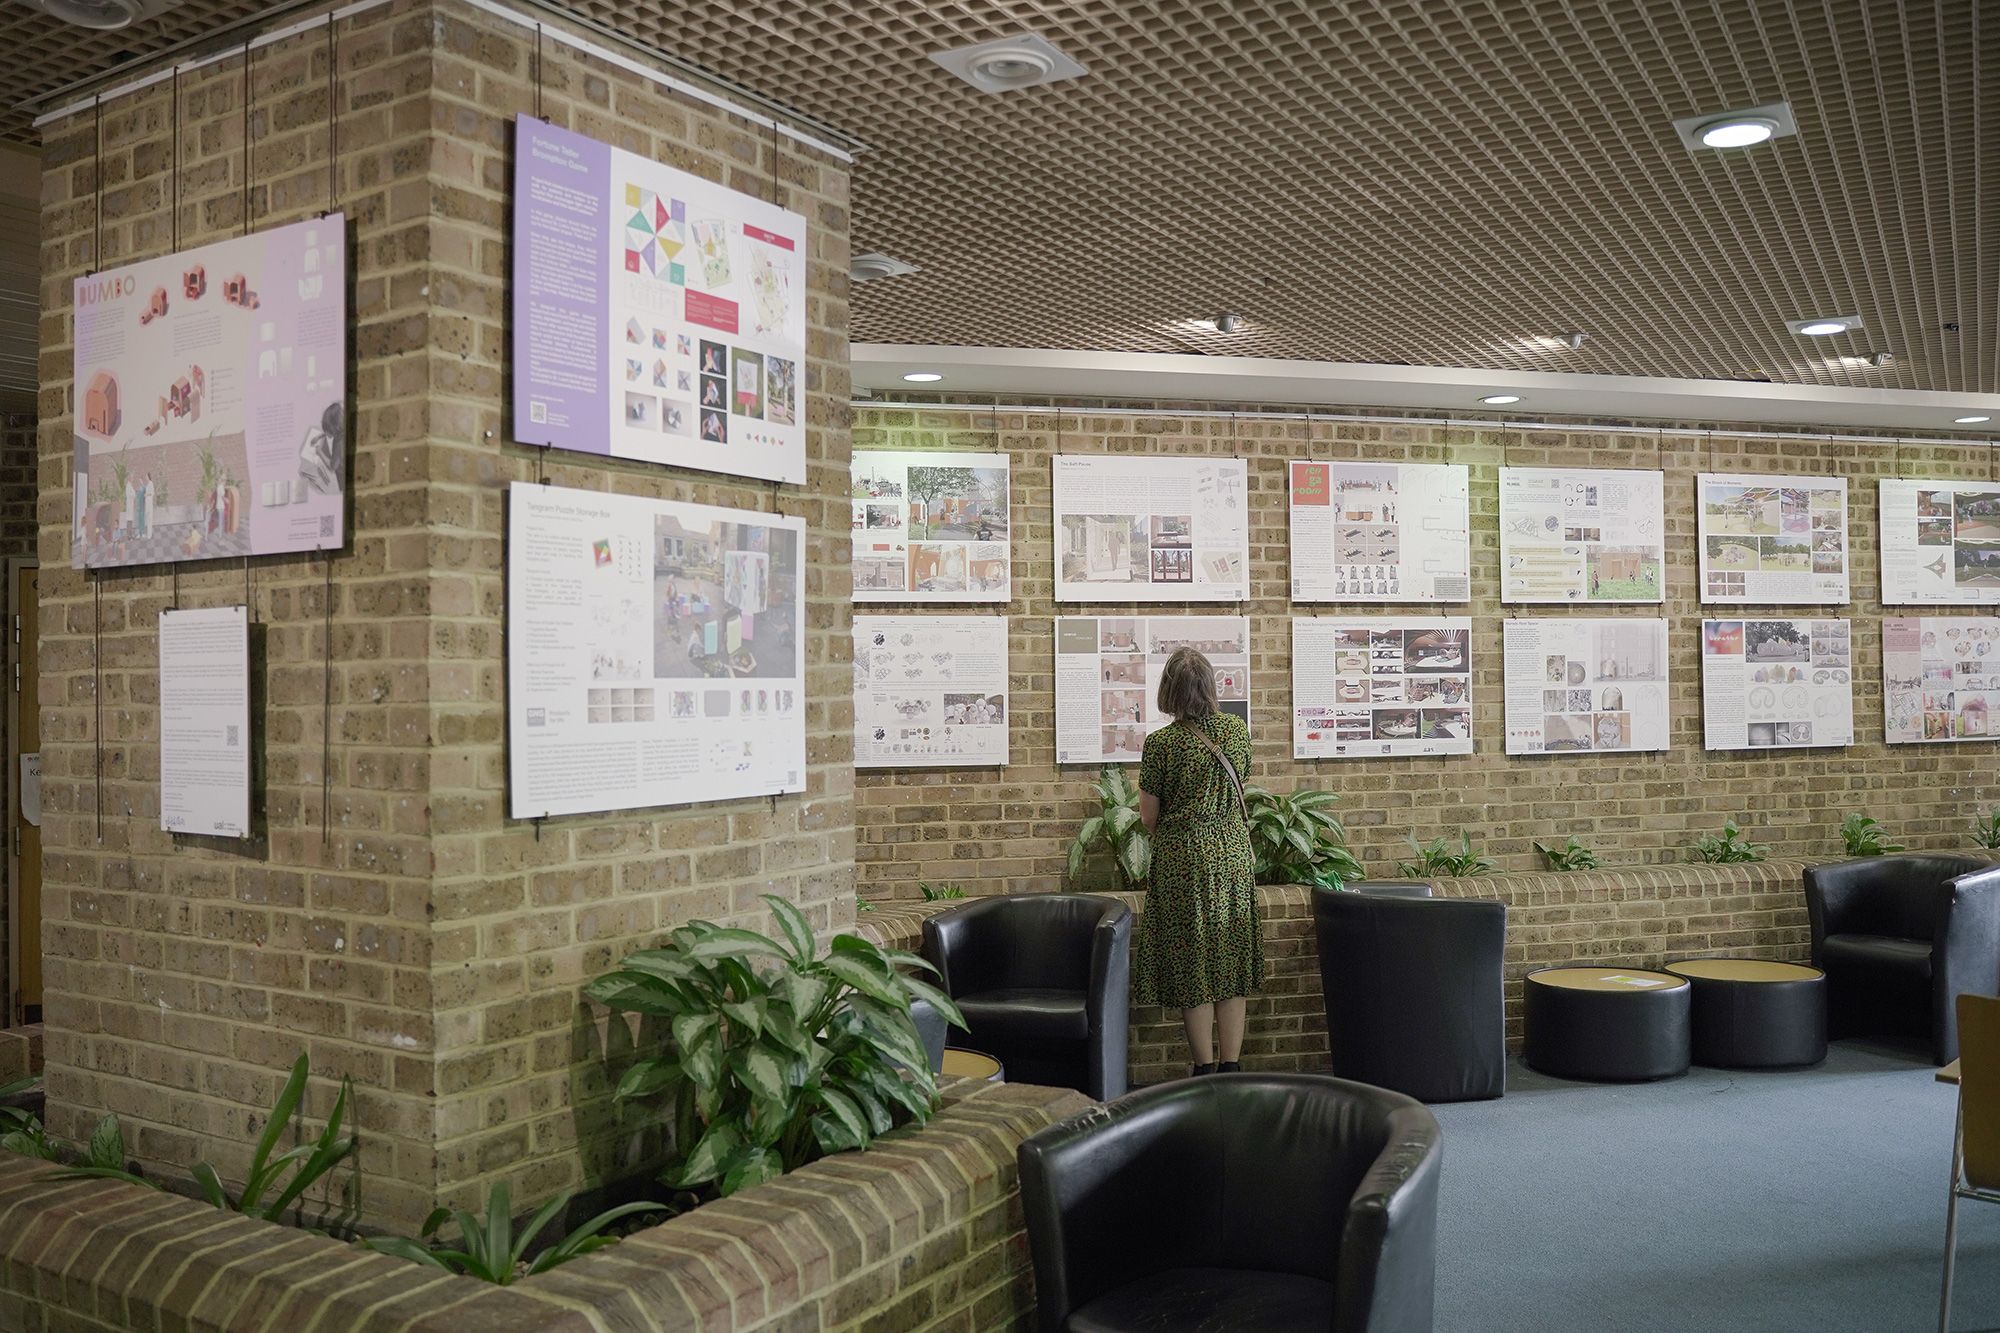  Photograph shows the final exhibition which took place at the Royal Brompton Hospital in the café space. The image shows a number of boards each with a design proposal for the hospital, there is a woman in a green dress looking at the boards. Around her are tables and chairs as well as some plants.  